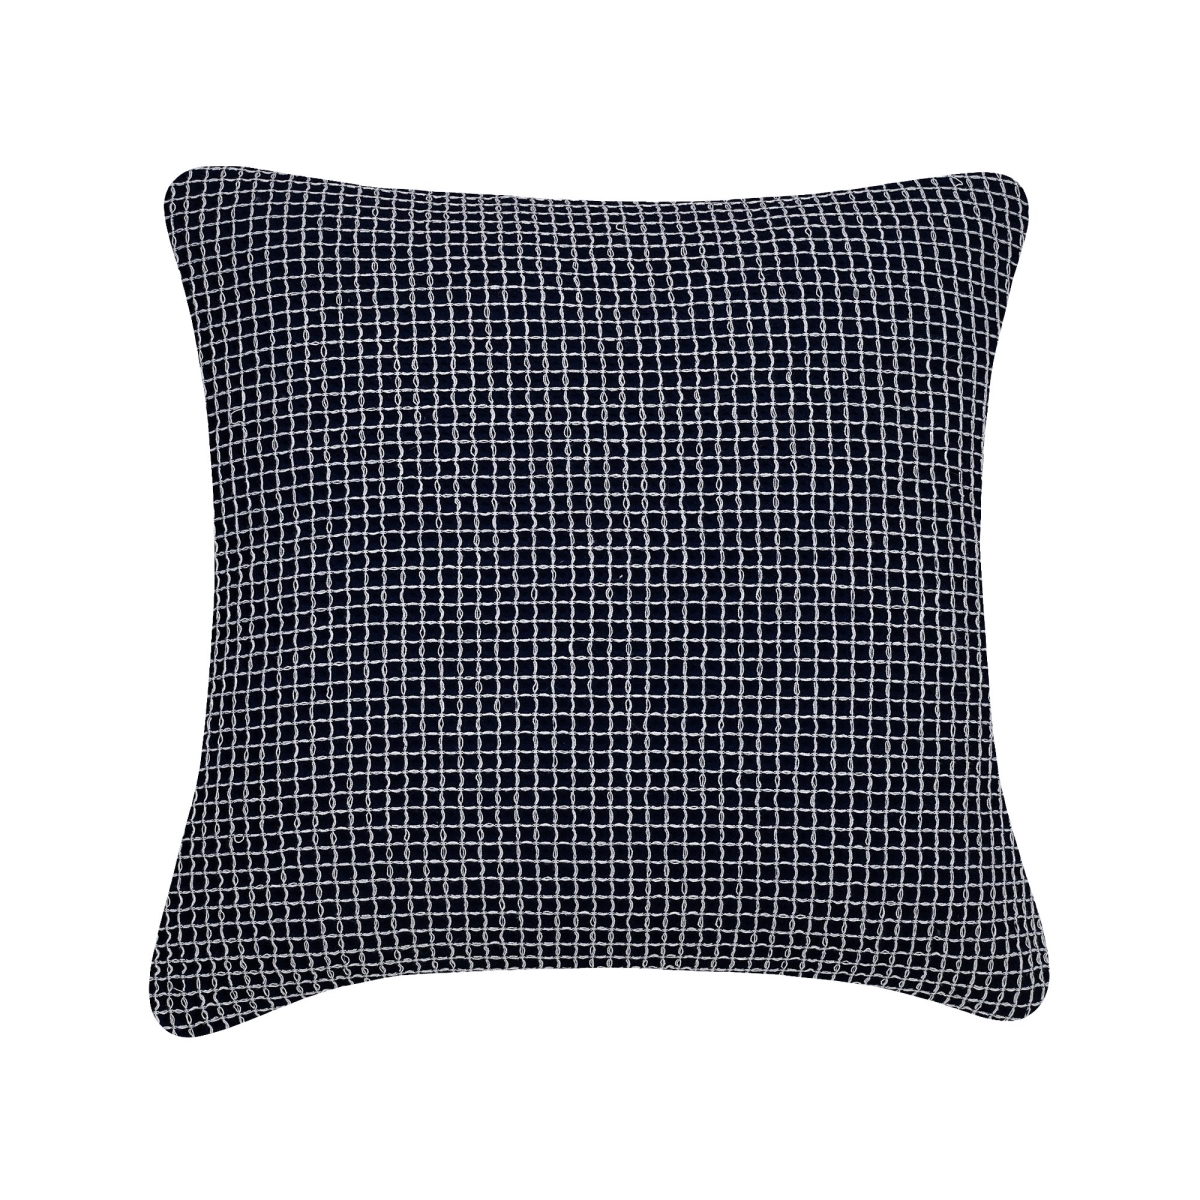 20 X 20 In. Waffle Cushion Cover - White & Navy